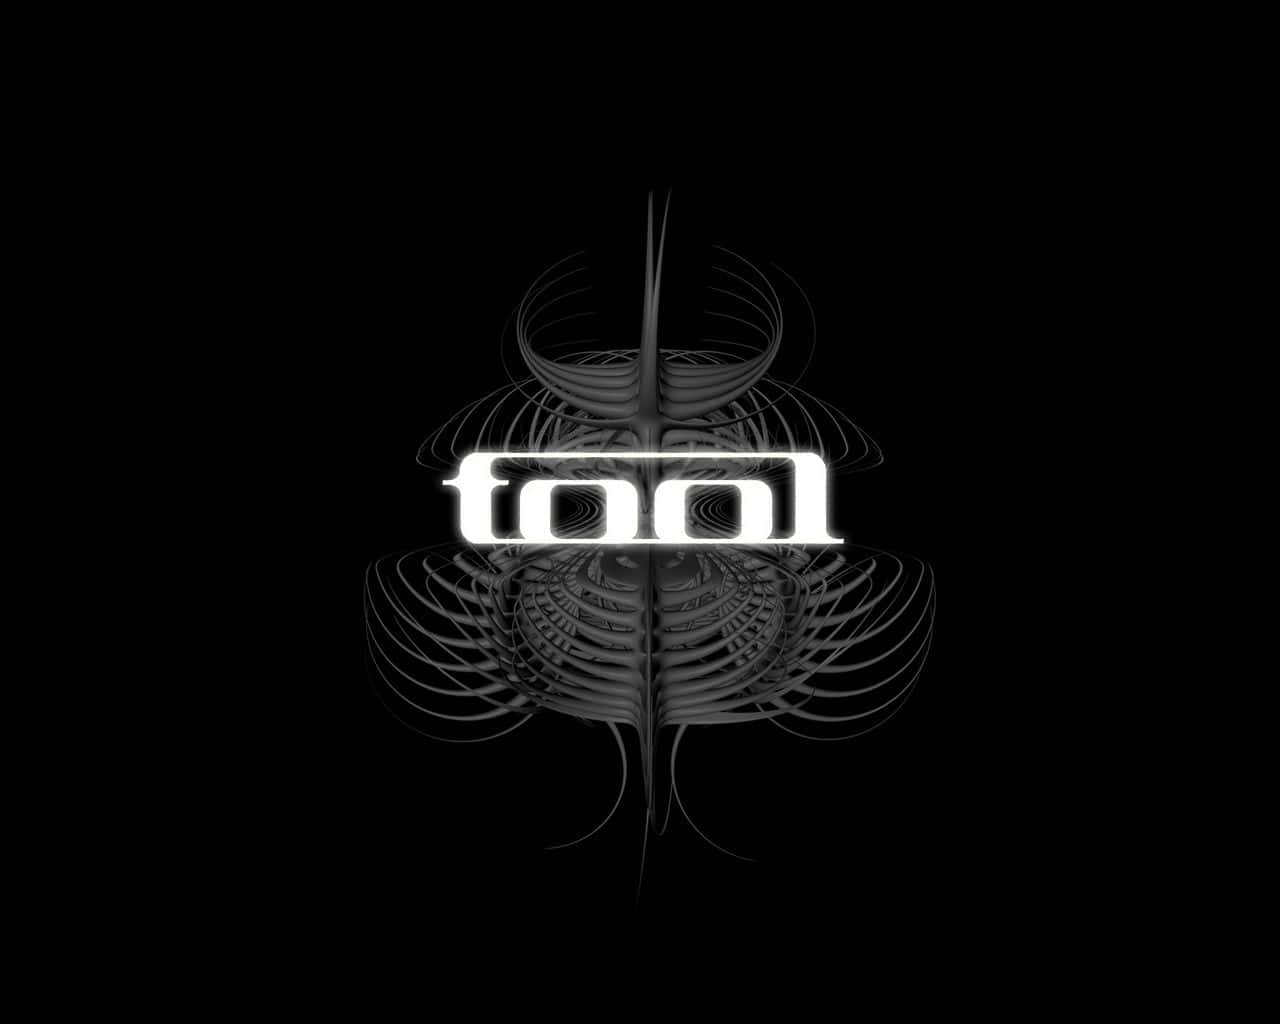 100+] Tool Band Wallpapers